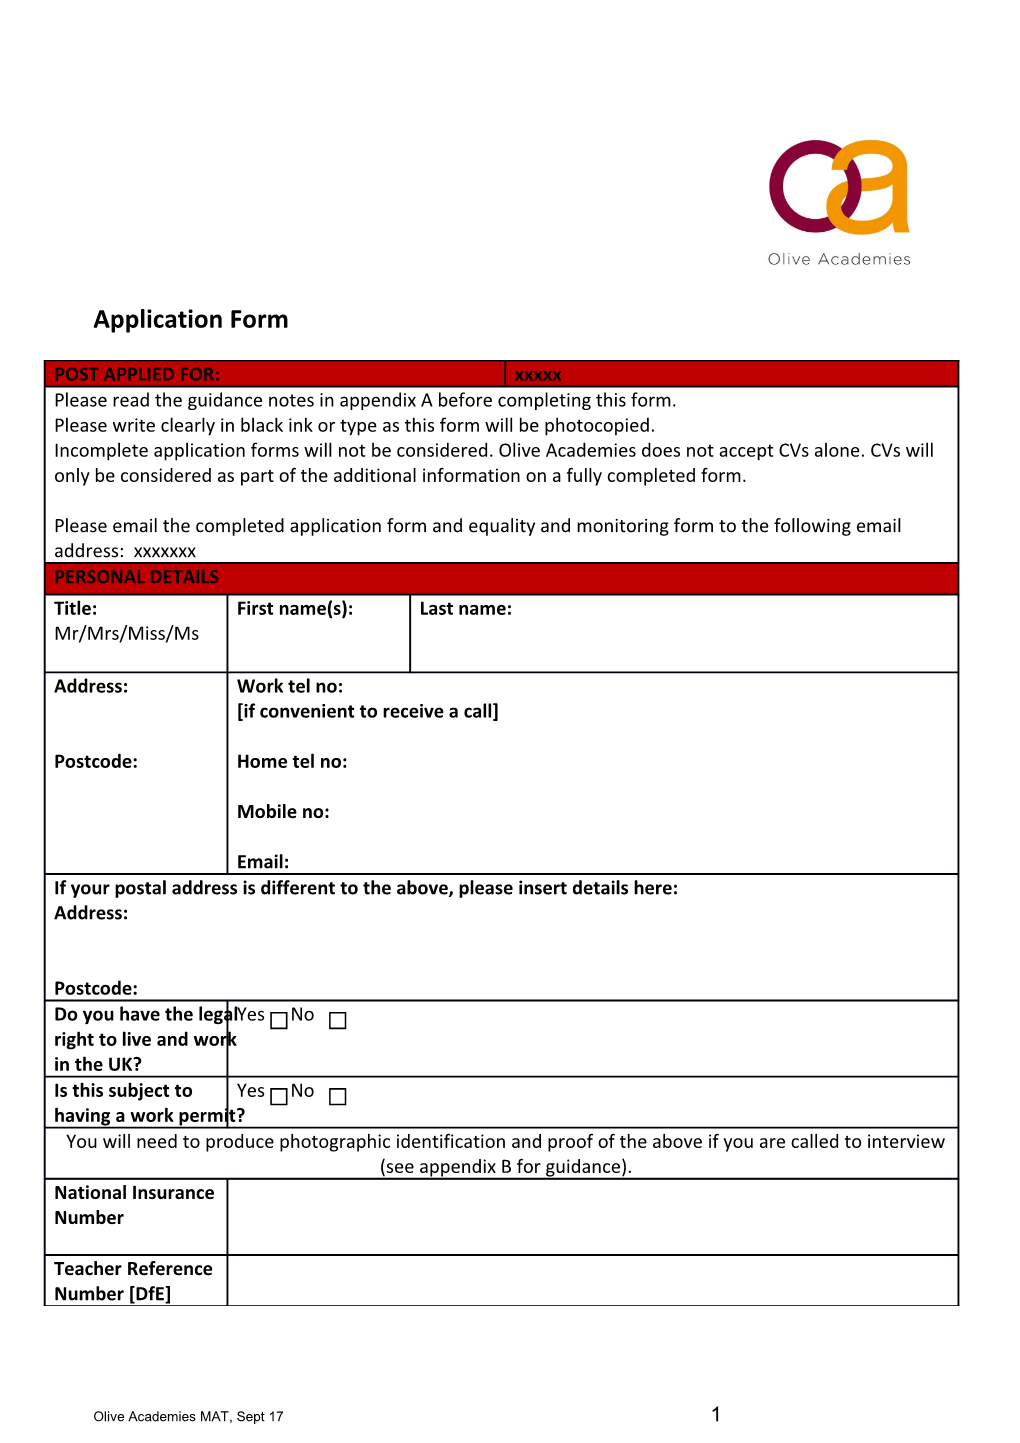 Application Form s77